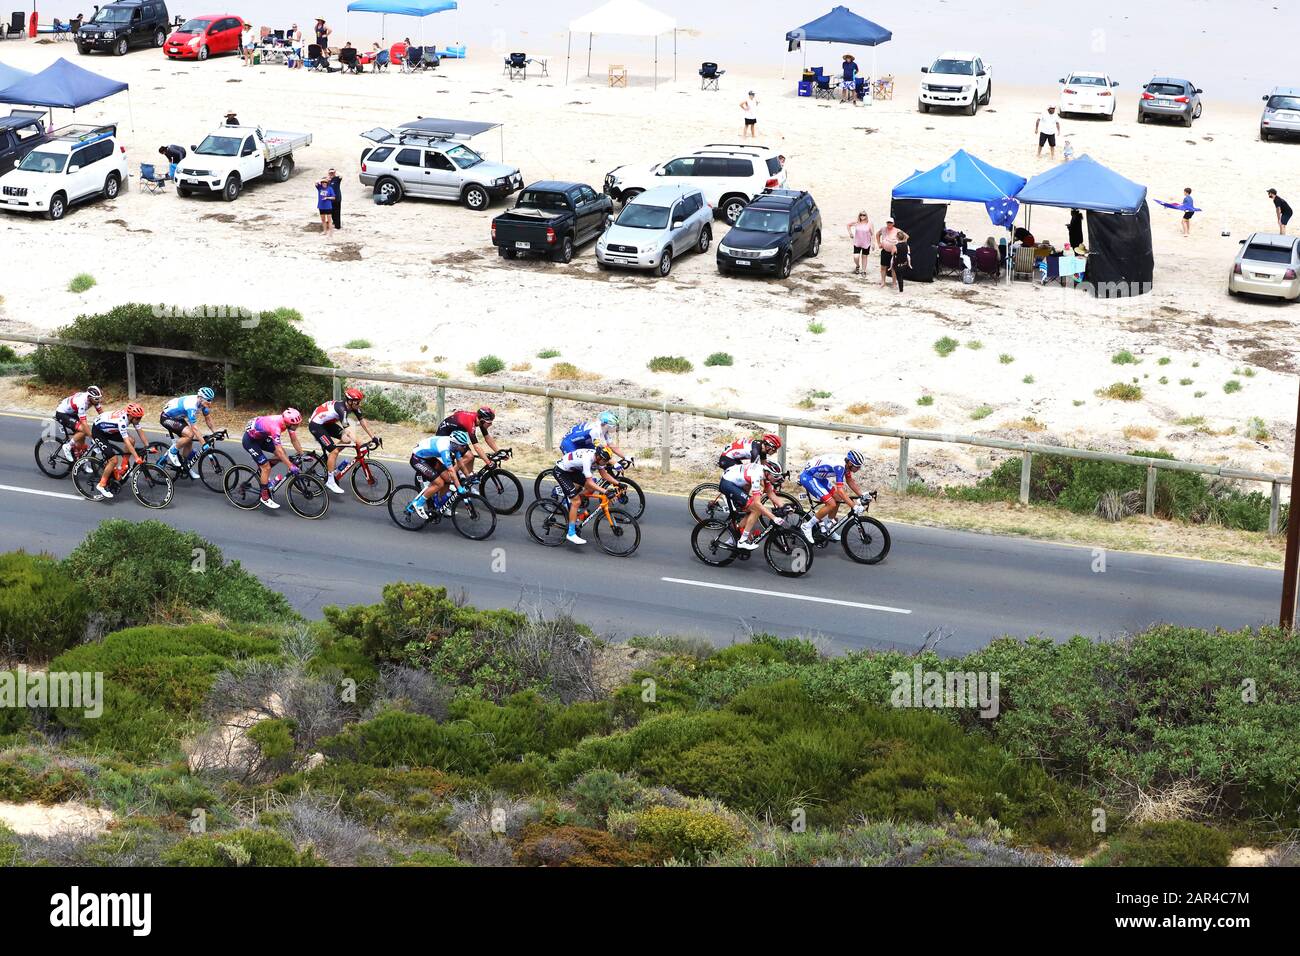 Aldinga, Adelaide, Australia. 26 January 2020. Riders competing on stage 6 of the Tour Down Under cycling race as it passes through the beachfront area of Aldinga. The stage winner was British rider Matthew Holmes of the Lotto Soudal team. He is the third rider in the shot. Credit: Russell Mountford/Alamy Live News. Stock Photo